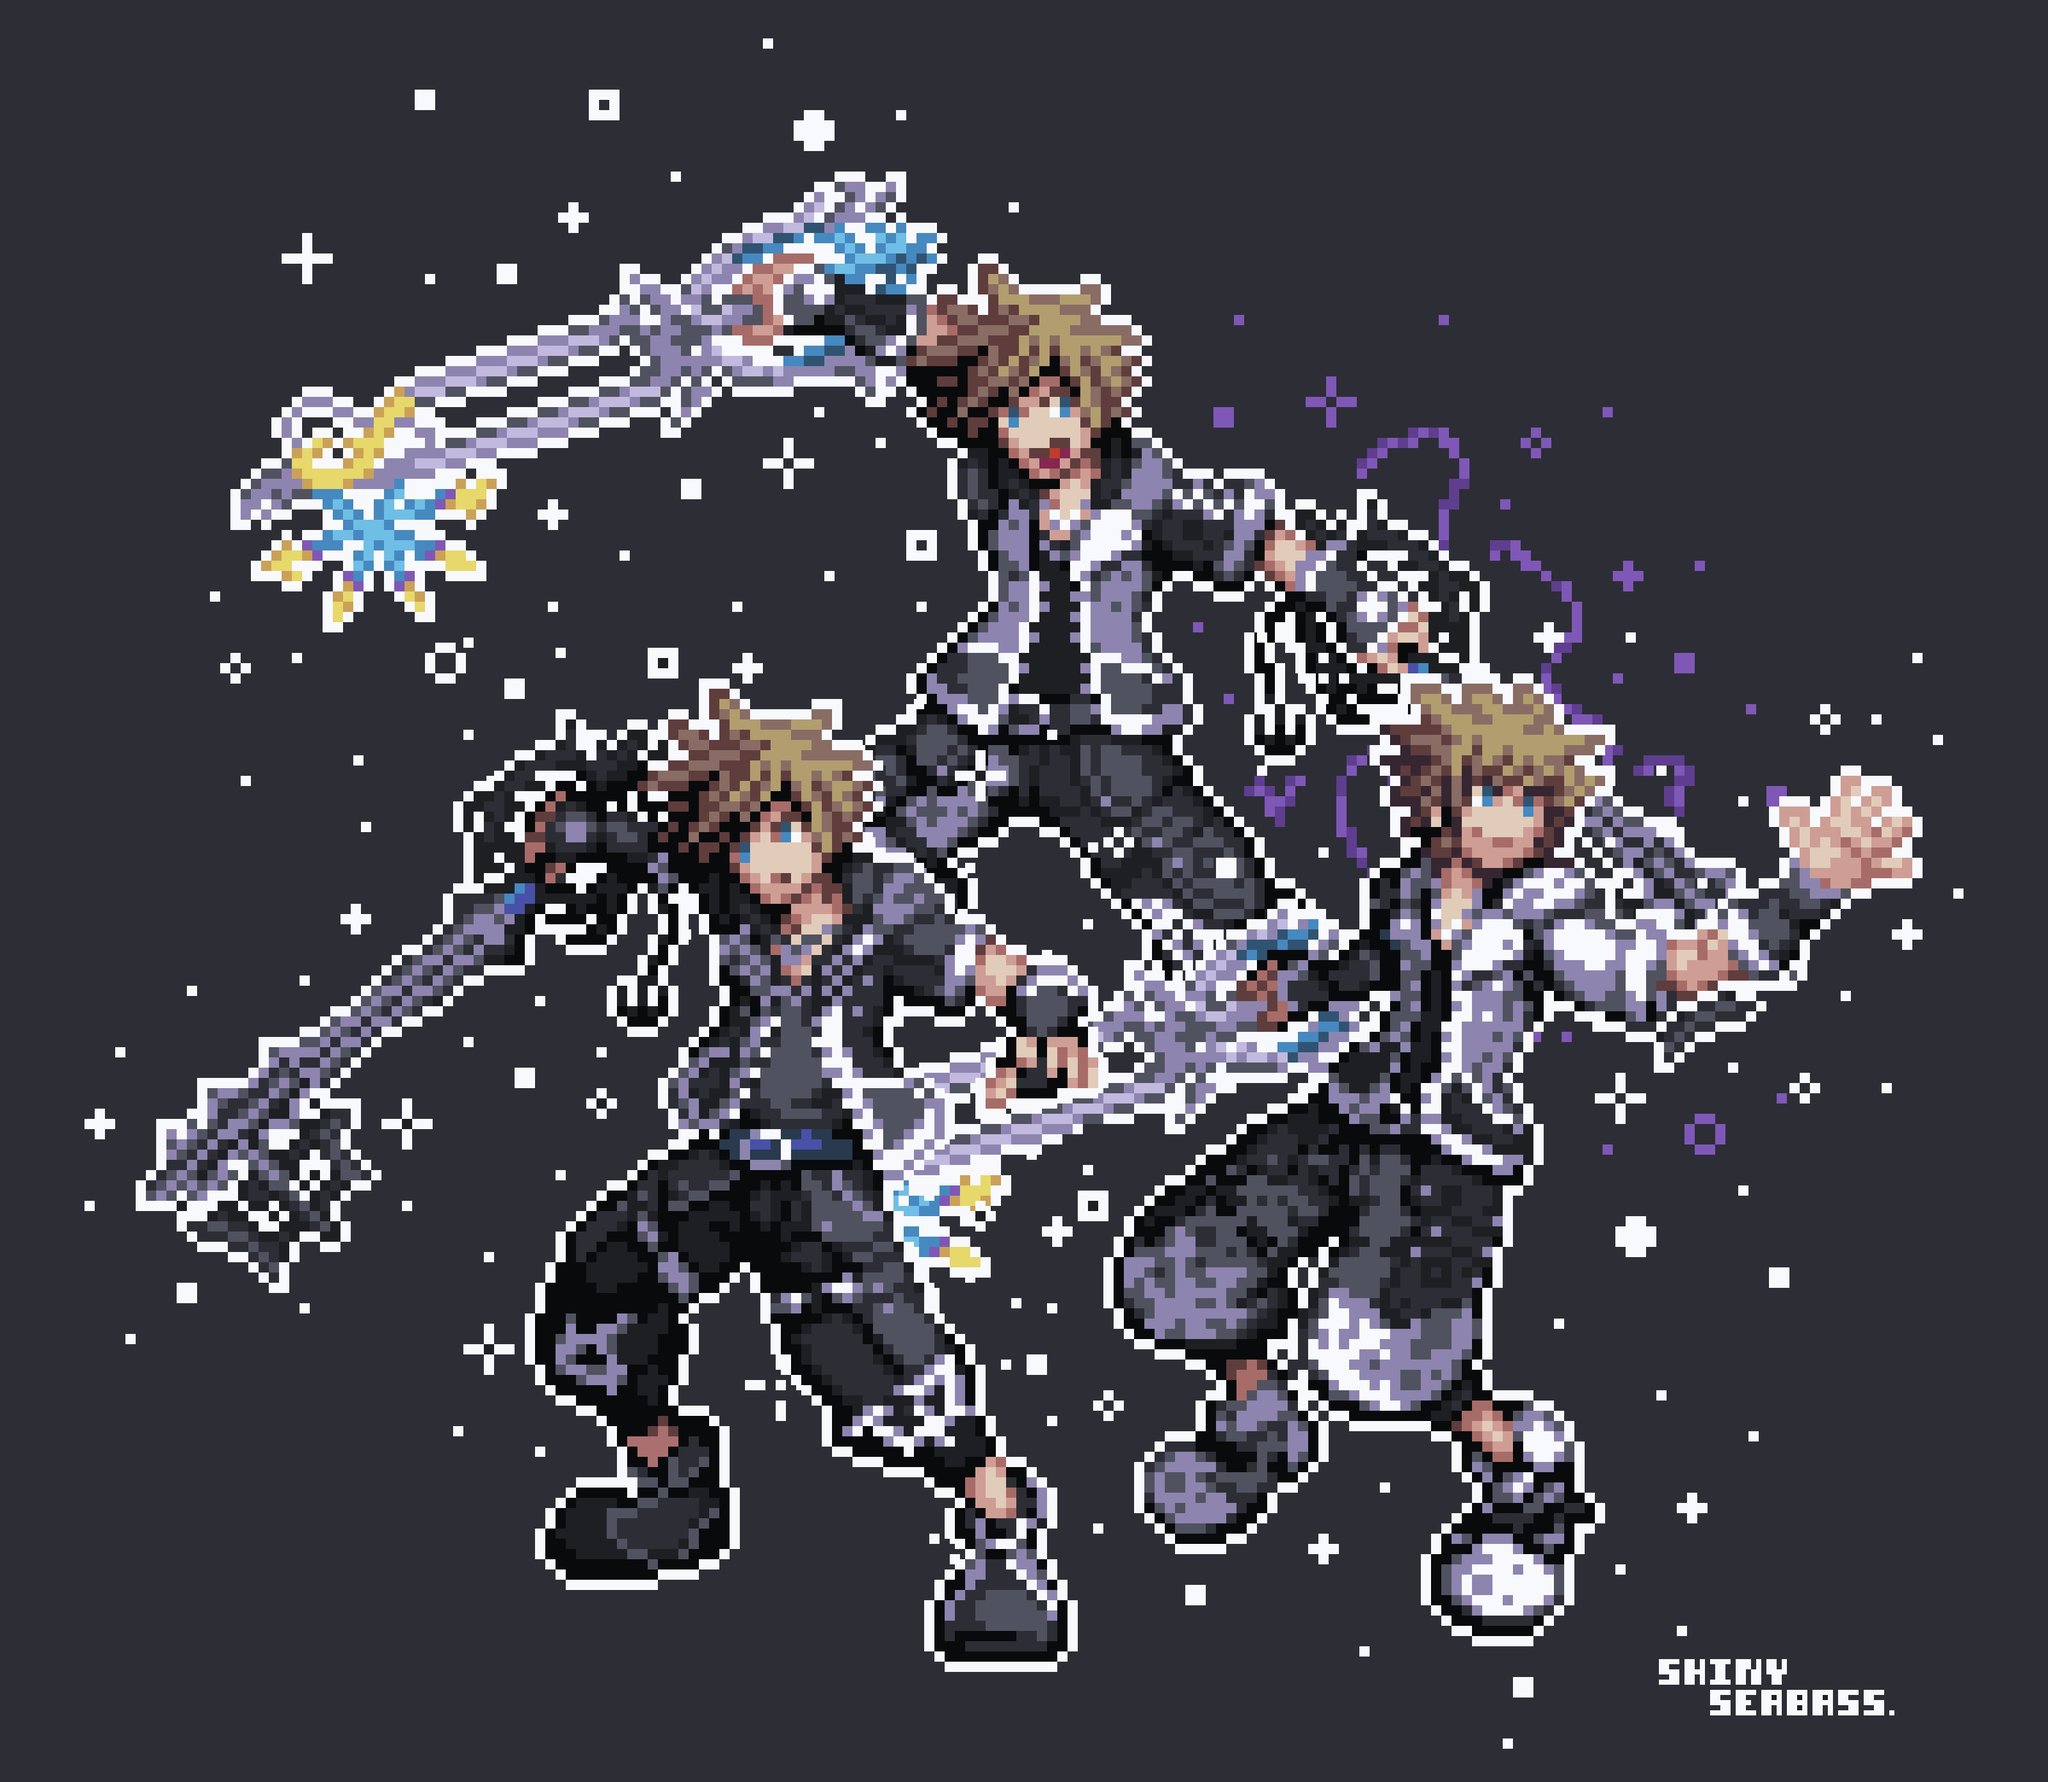 Sebastian Seabass I M So Glad Se Added Oblivion And Oathkeeper For Sora In Kingdom Hearts 3 Dark Light And Double Forms Are Sick I Just Wish Both Forms Felt A